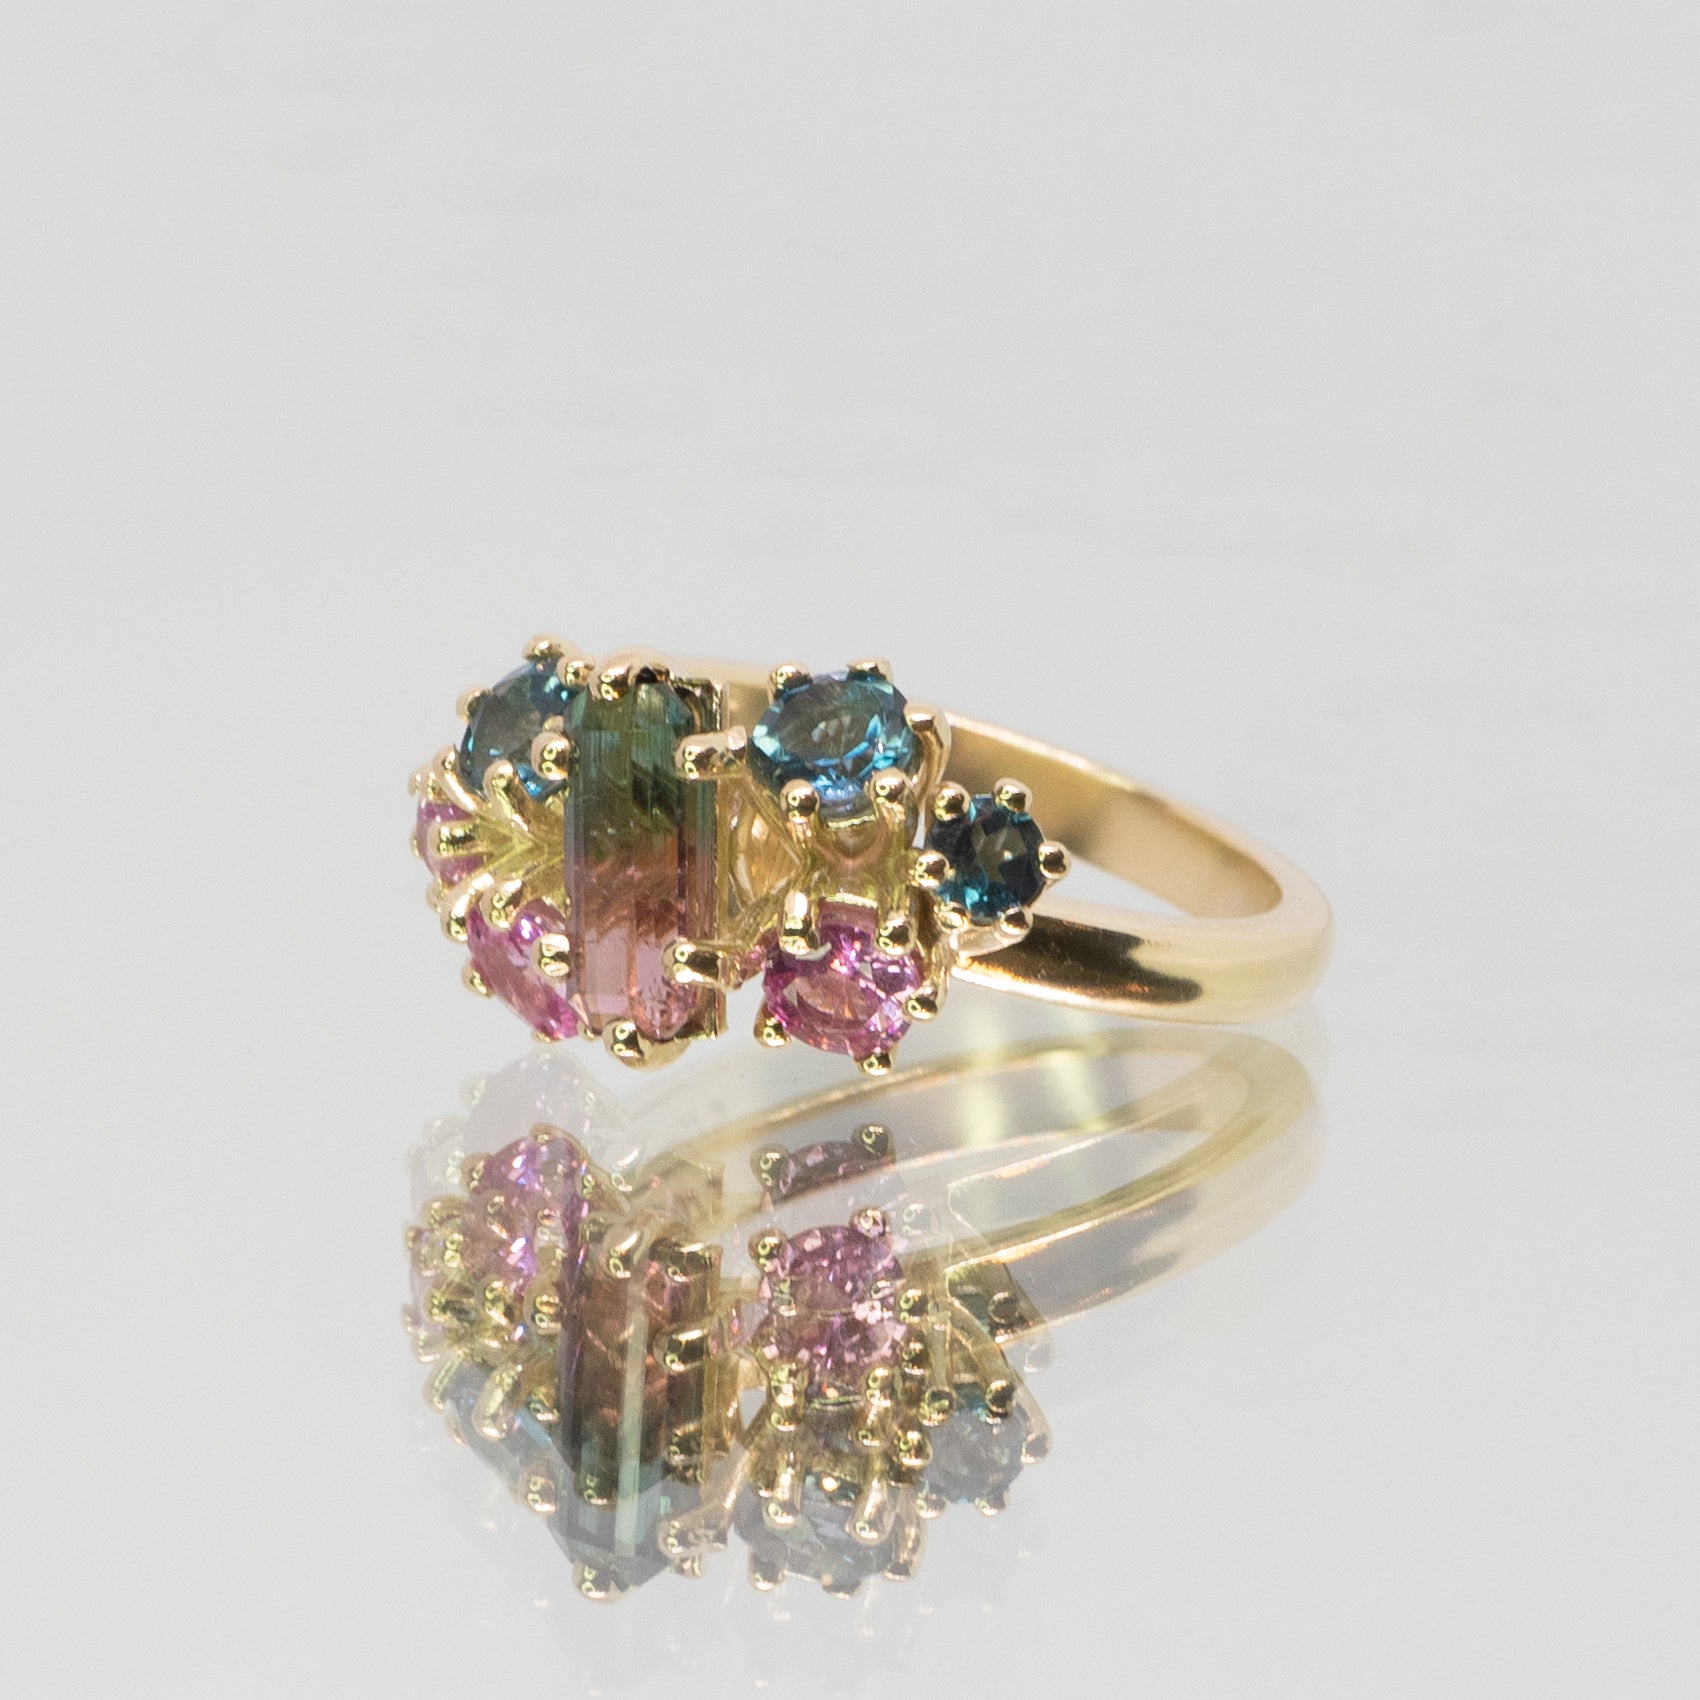 Bespoke -  Cluster ring with Blue and Pink Tourmaline with pink tourmaline and topaz